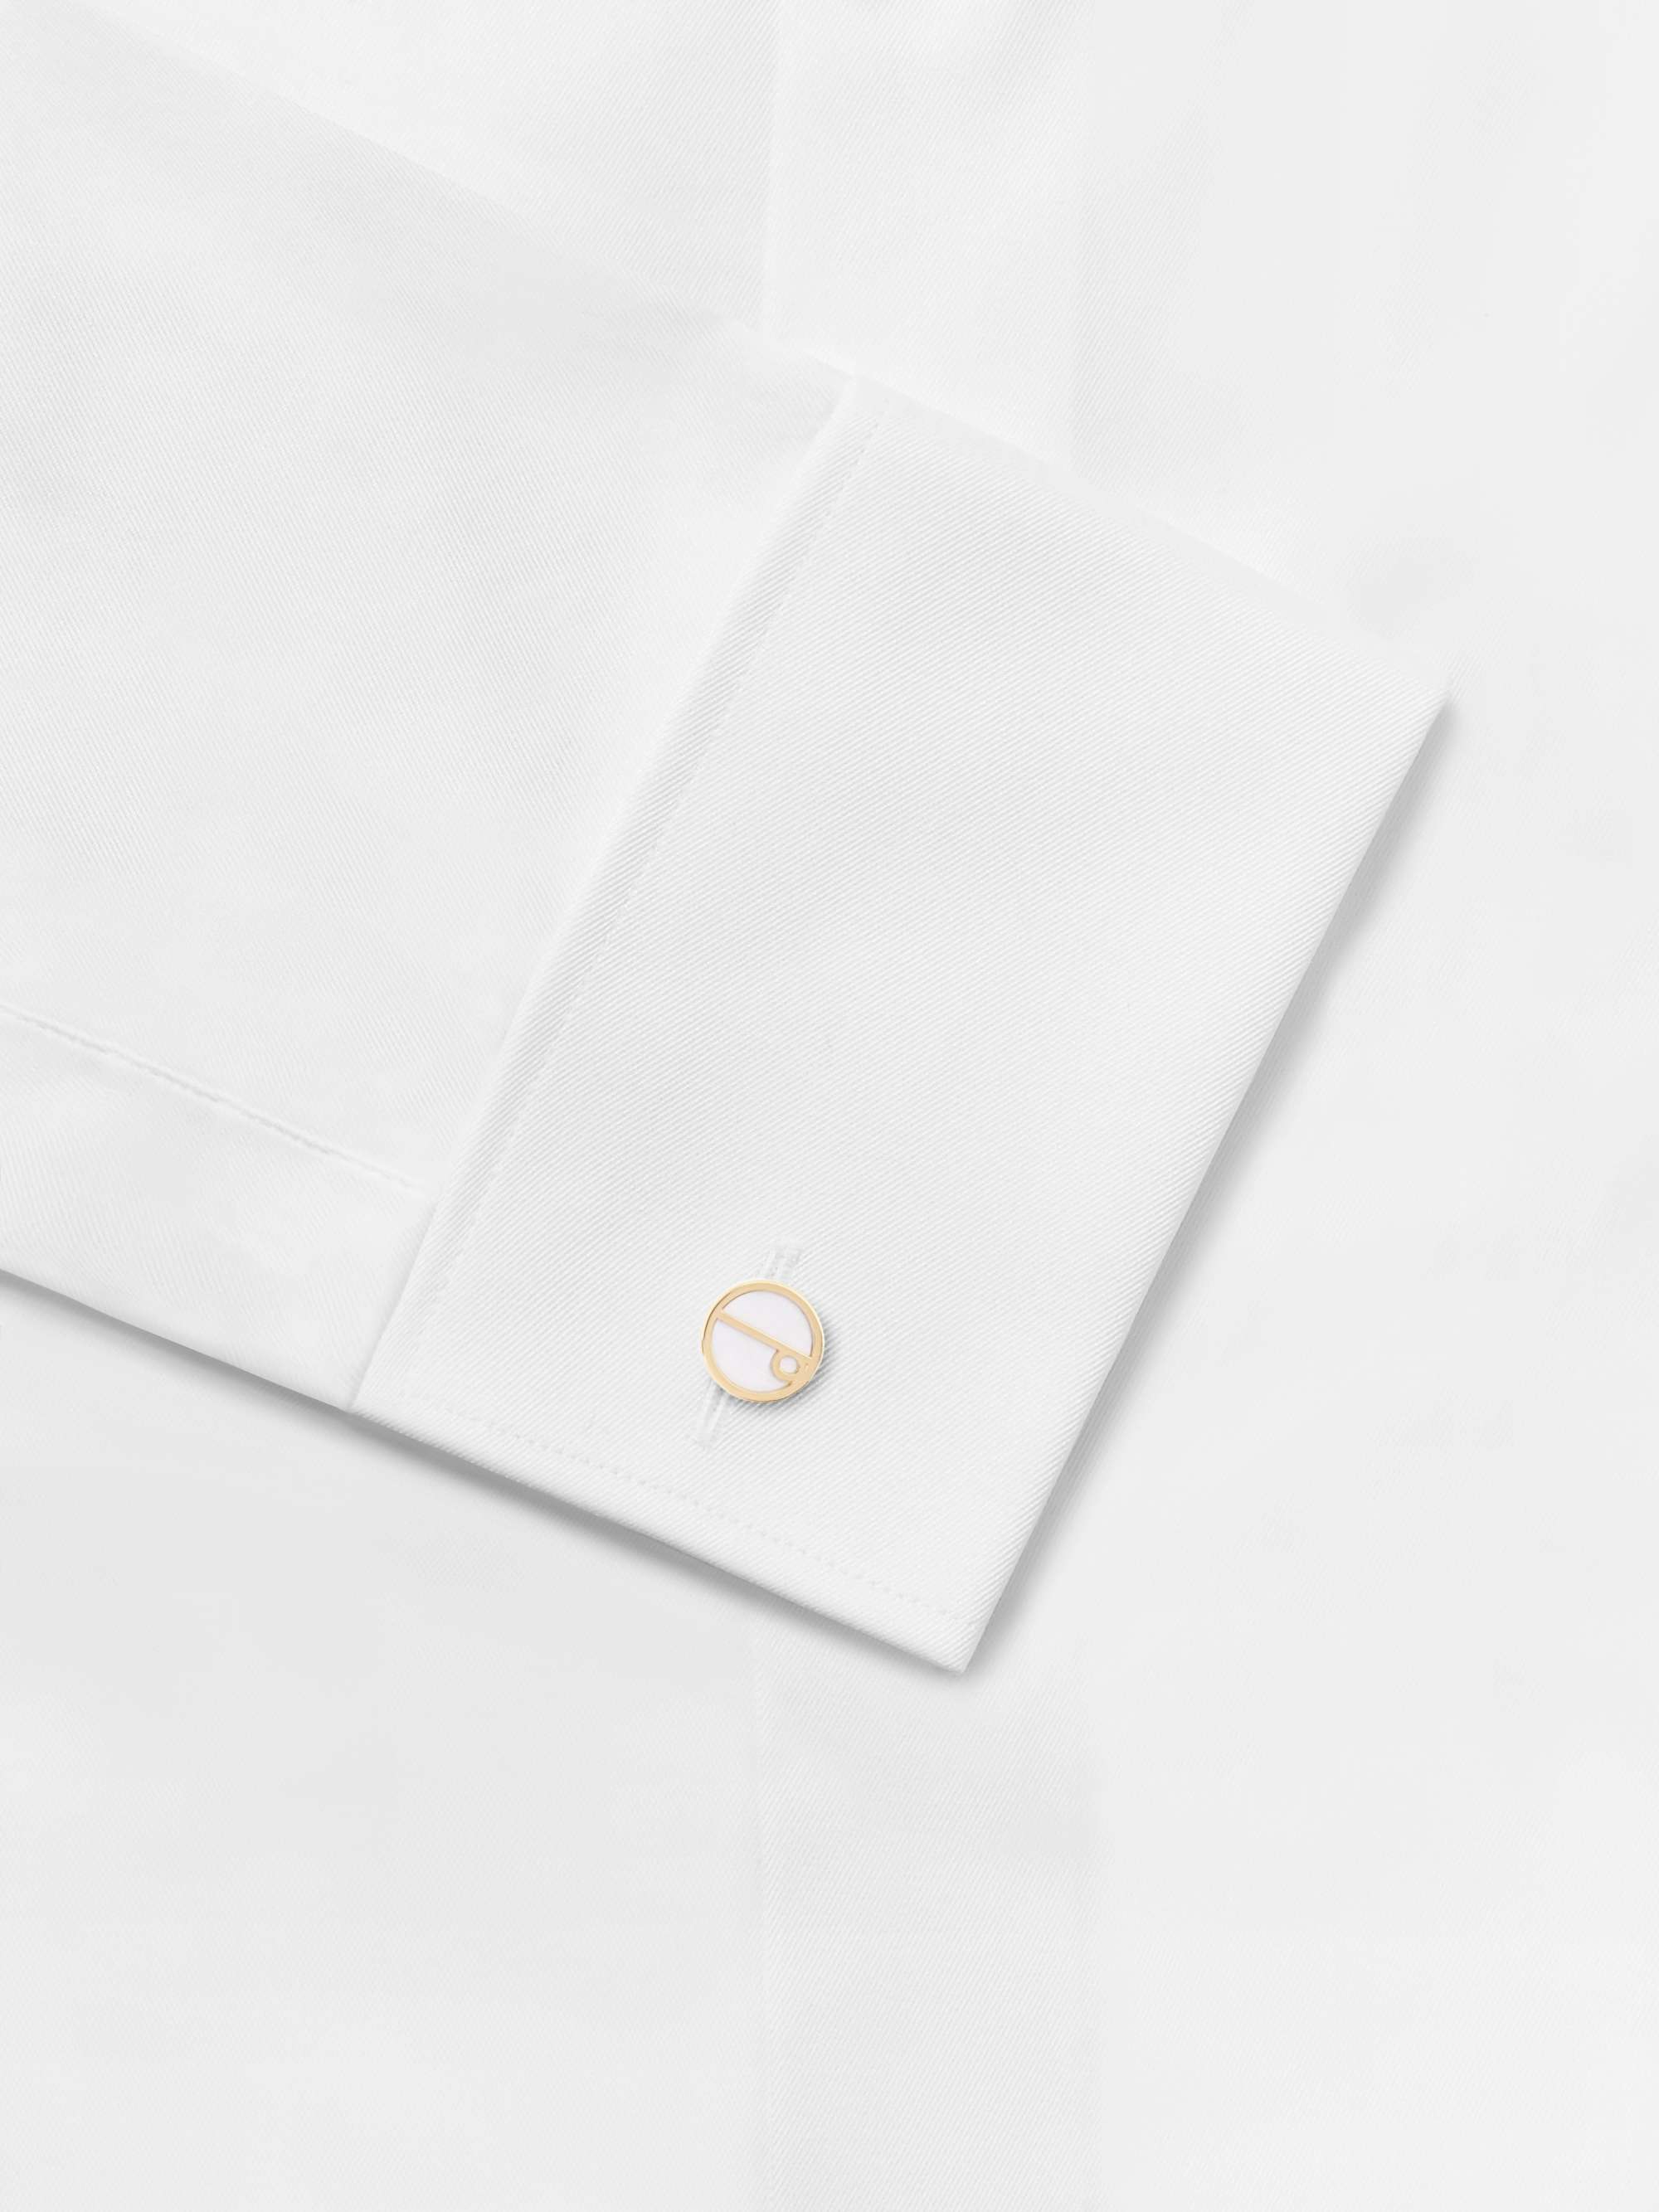 DUNHILL Gold- and Silver-Tone Cufflinks